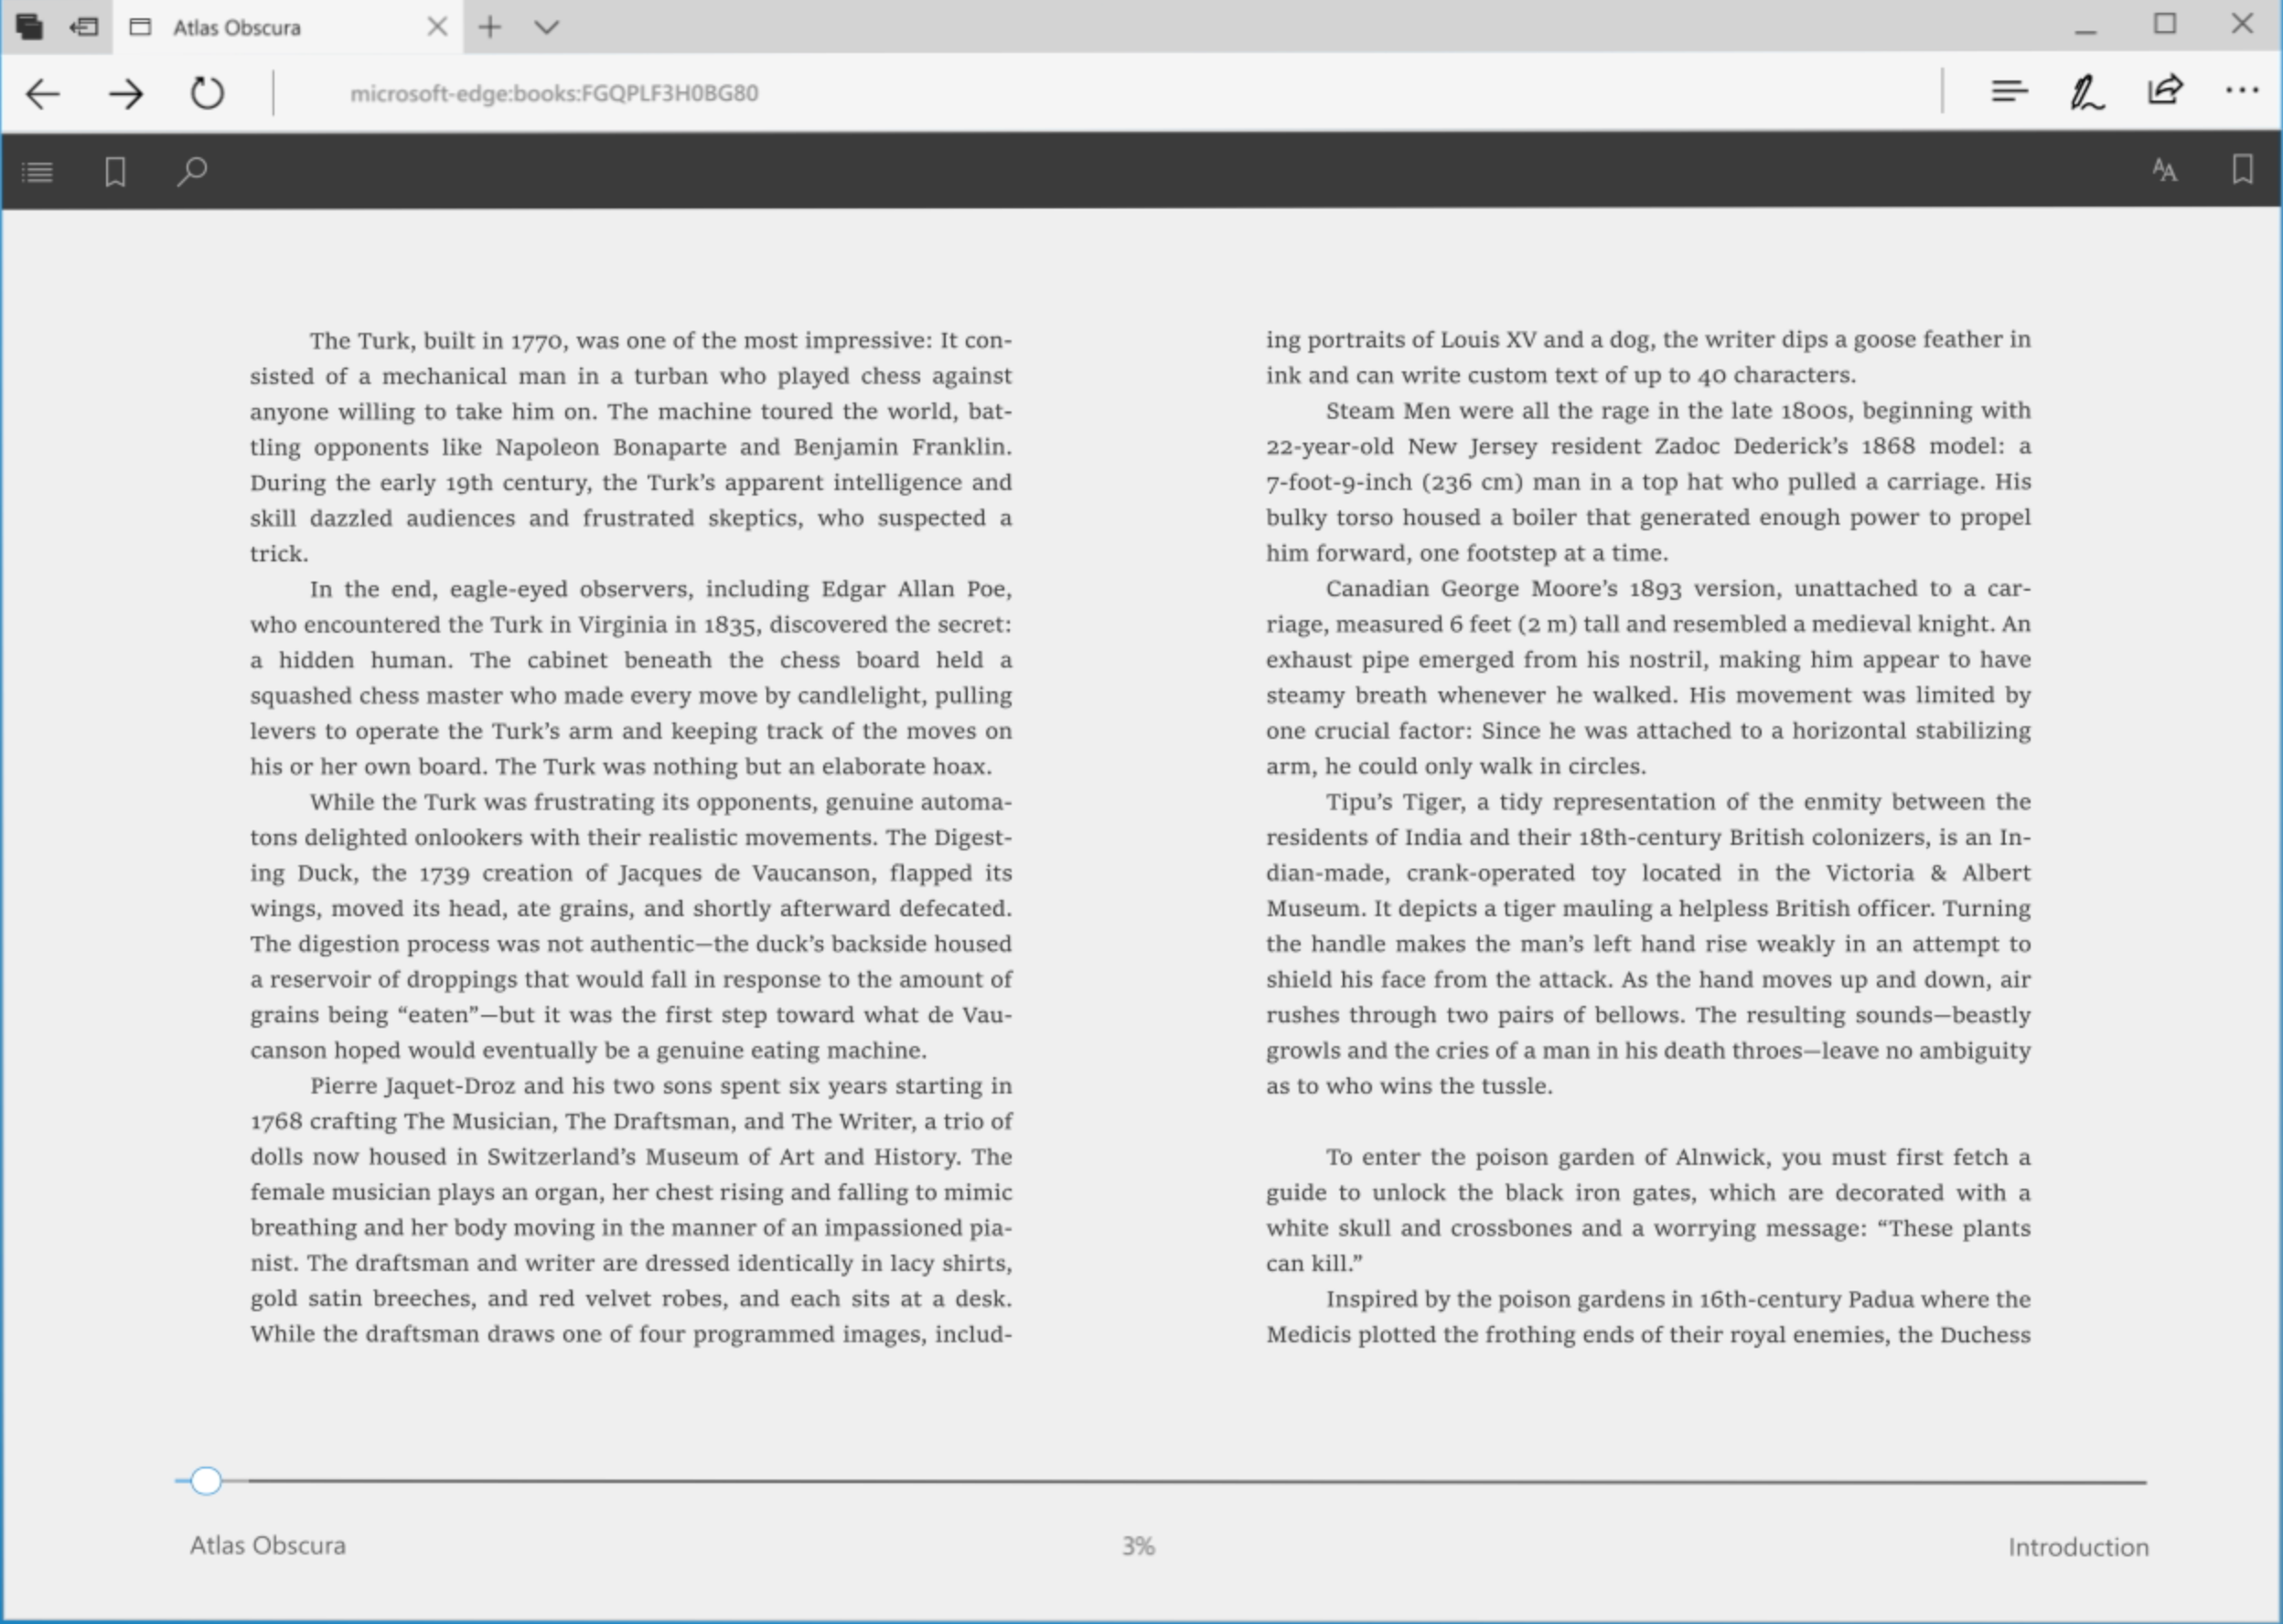 Once you’ve purchased a book from the Windows Store, you can start reading immediately with Microsoft Edge, which supports offline reading without an internet connection.